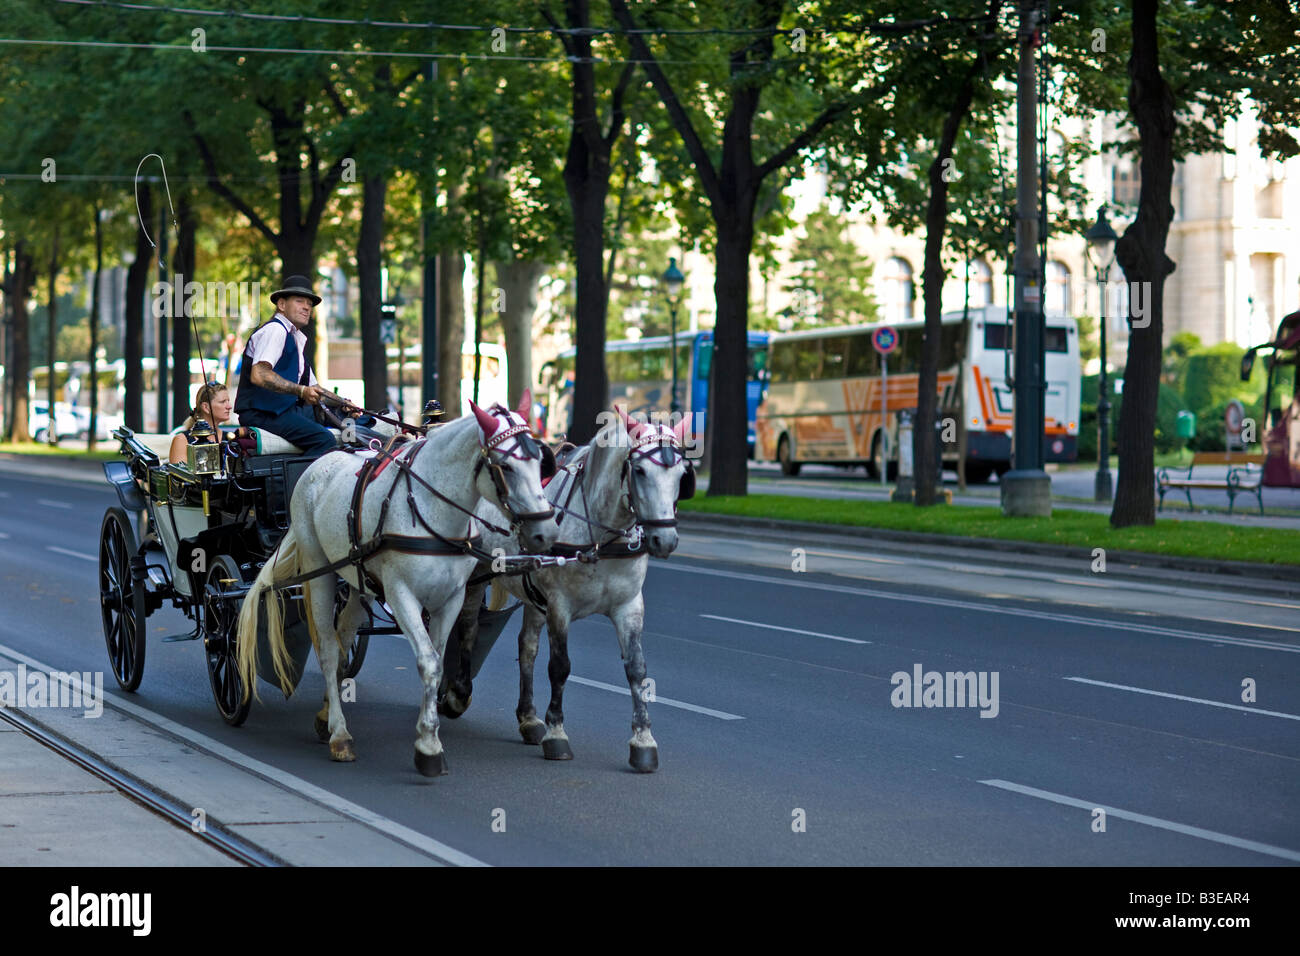 Fiaker traditional viennese horse carriage Stock Photo